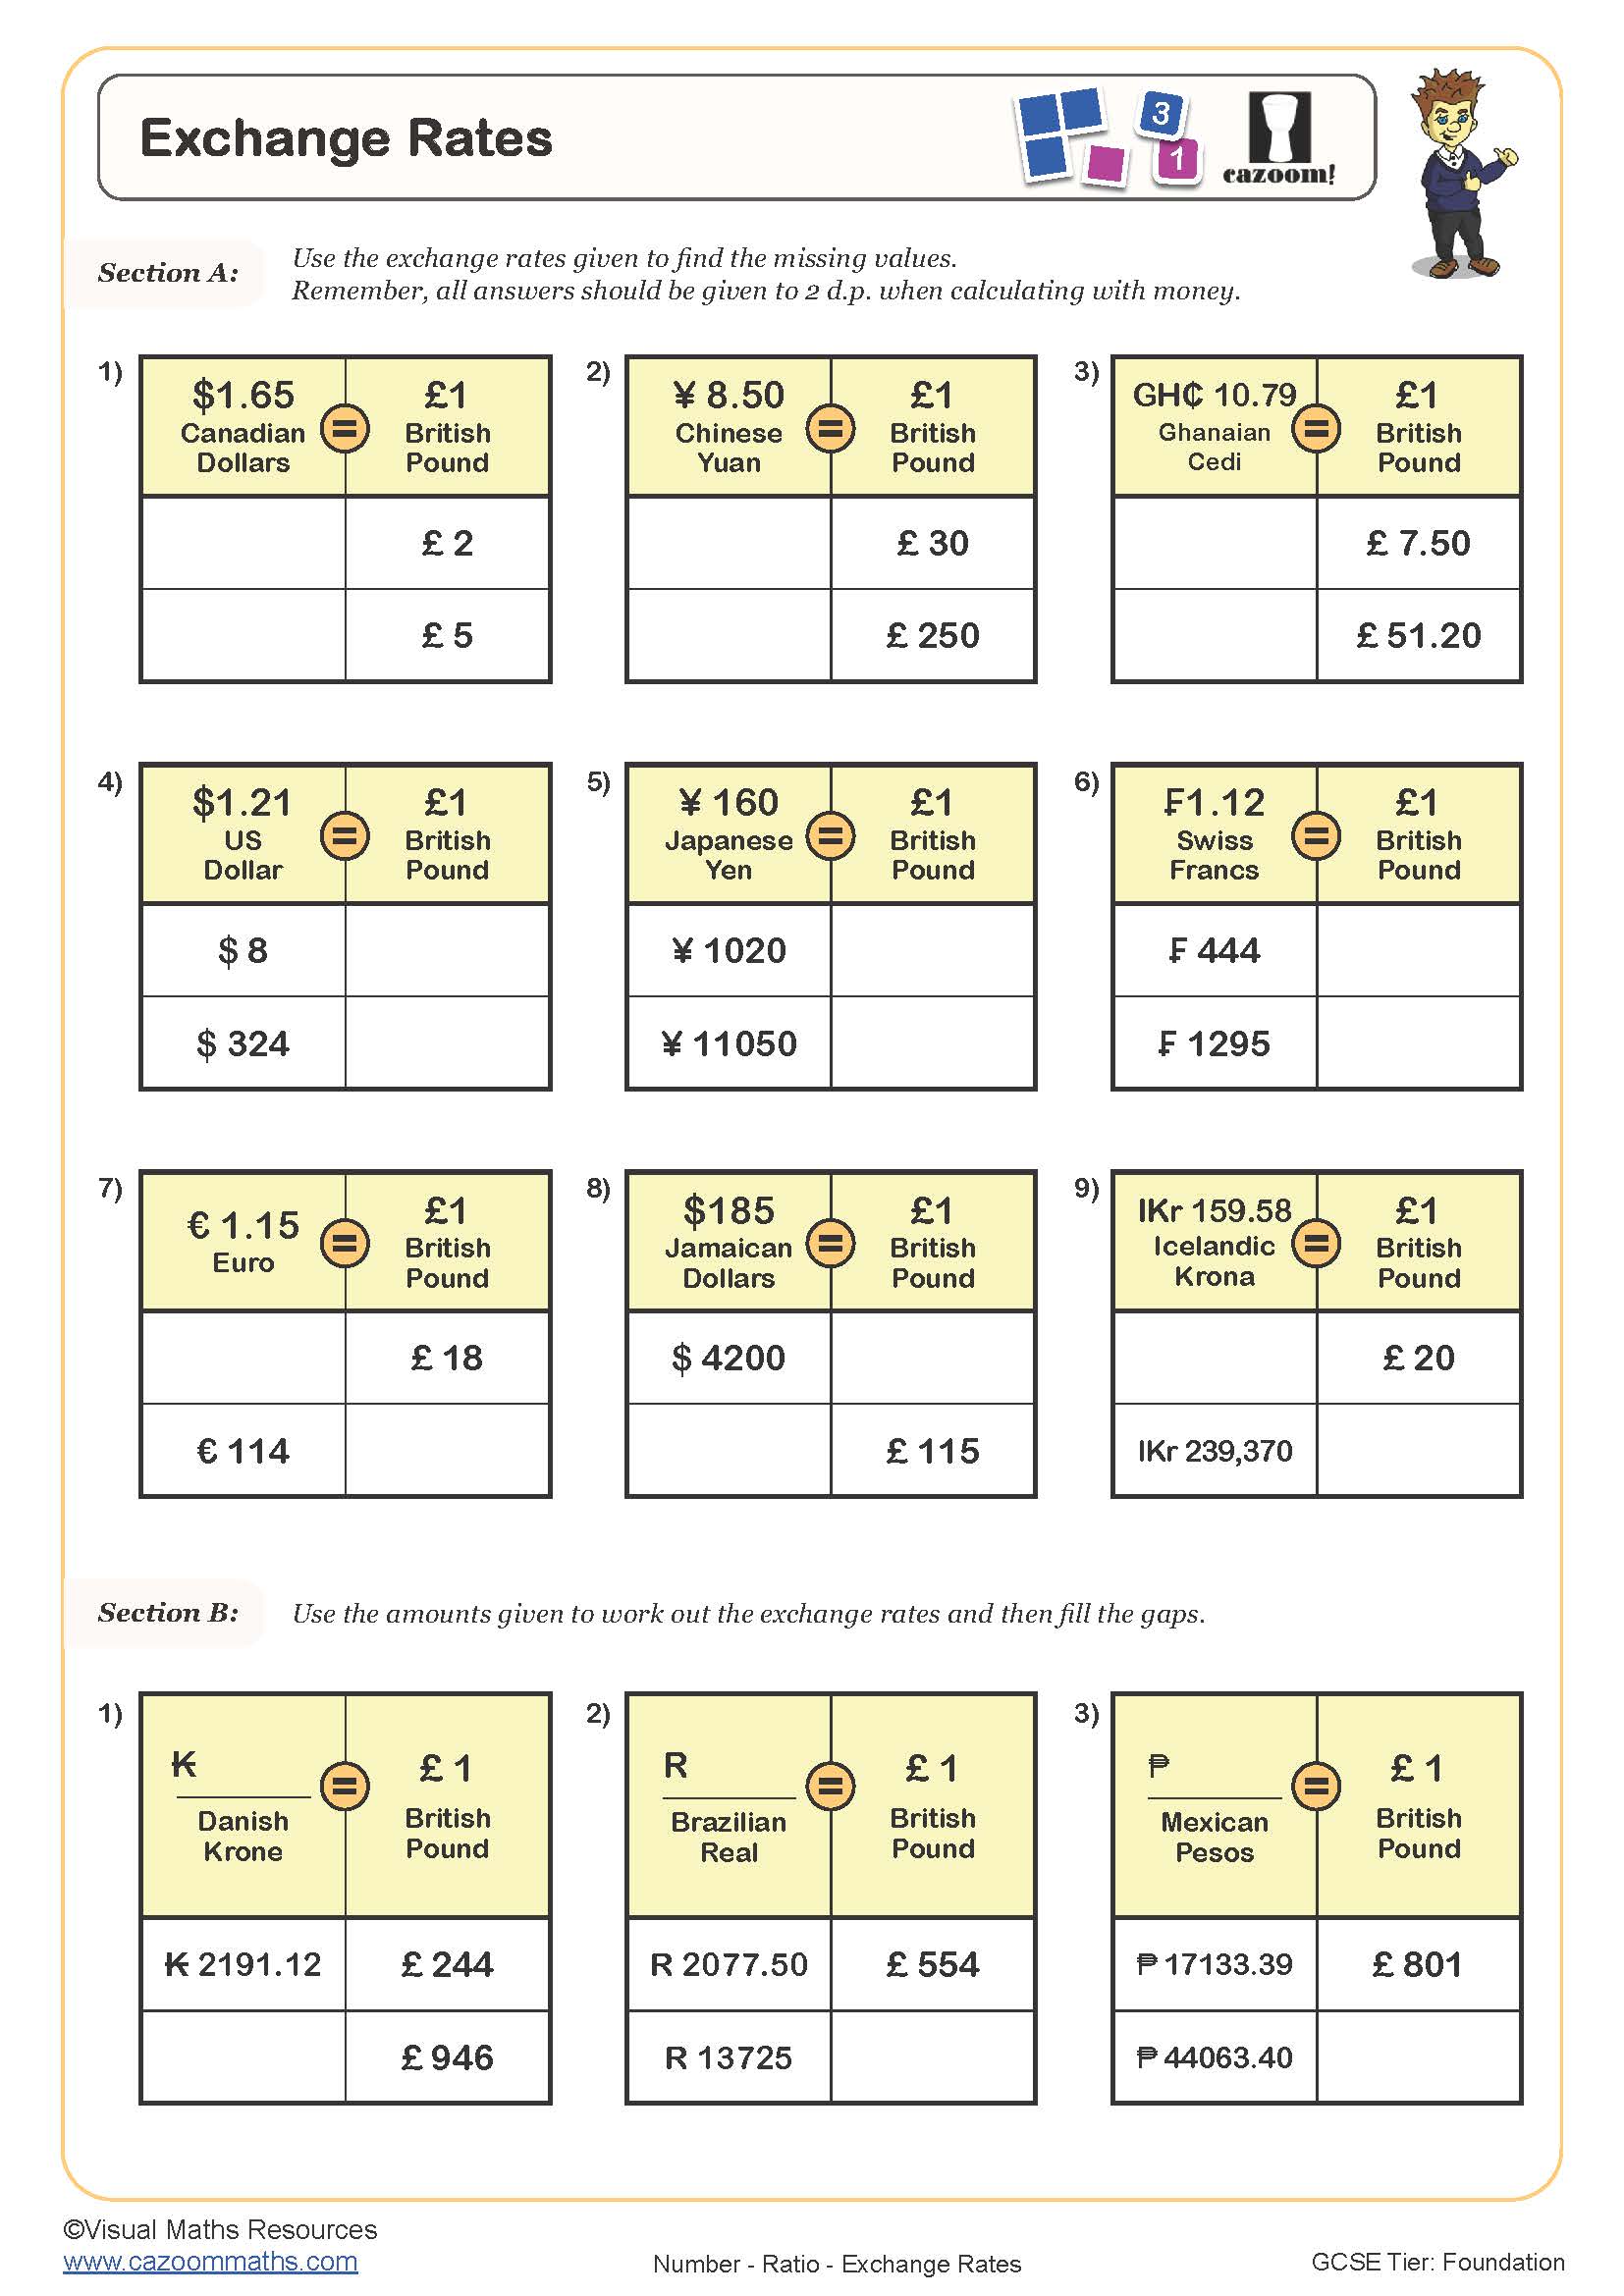 Exchange Rates worksheet suitable for students in KS3